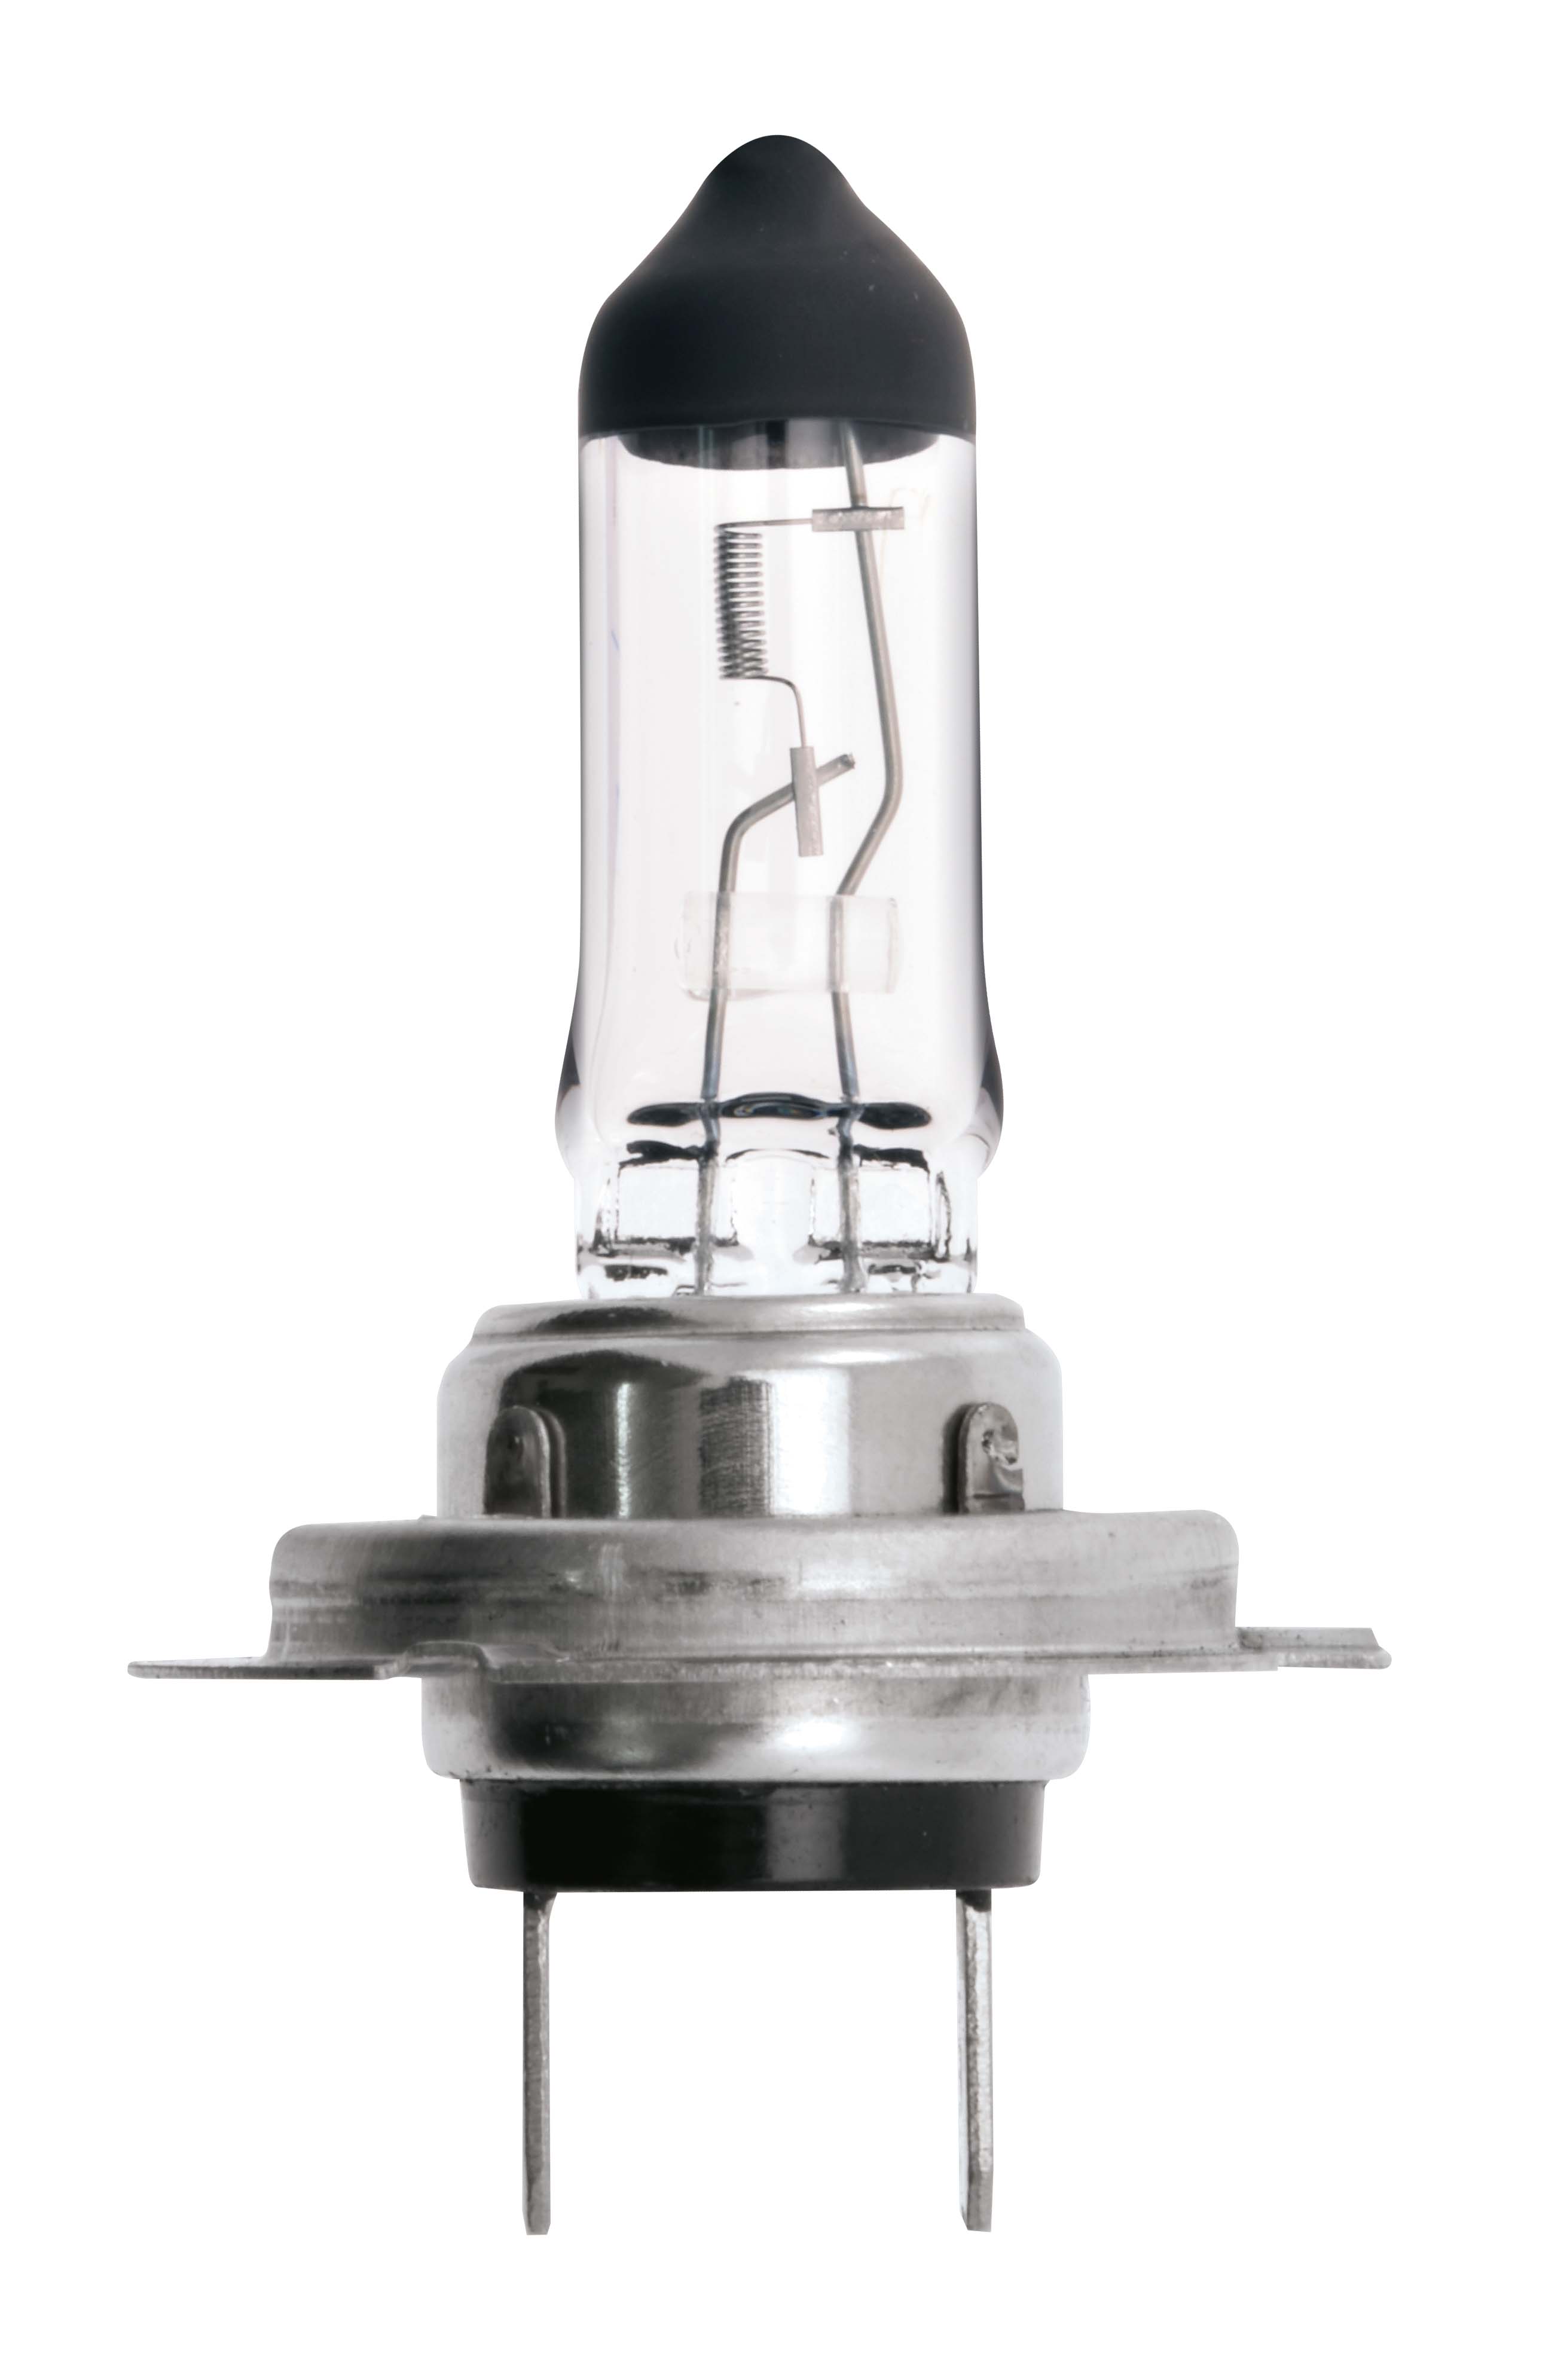 12v, 100w Halogen Bulb With A Px26d Base Main Image